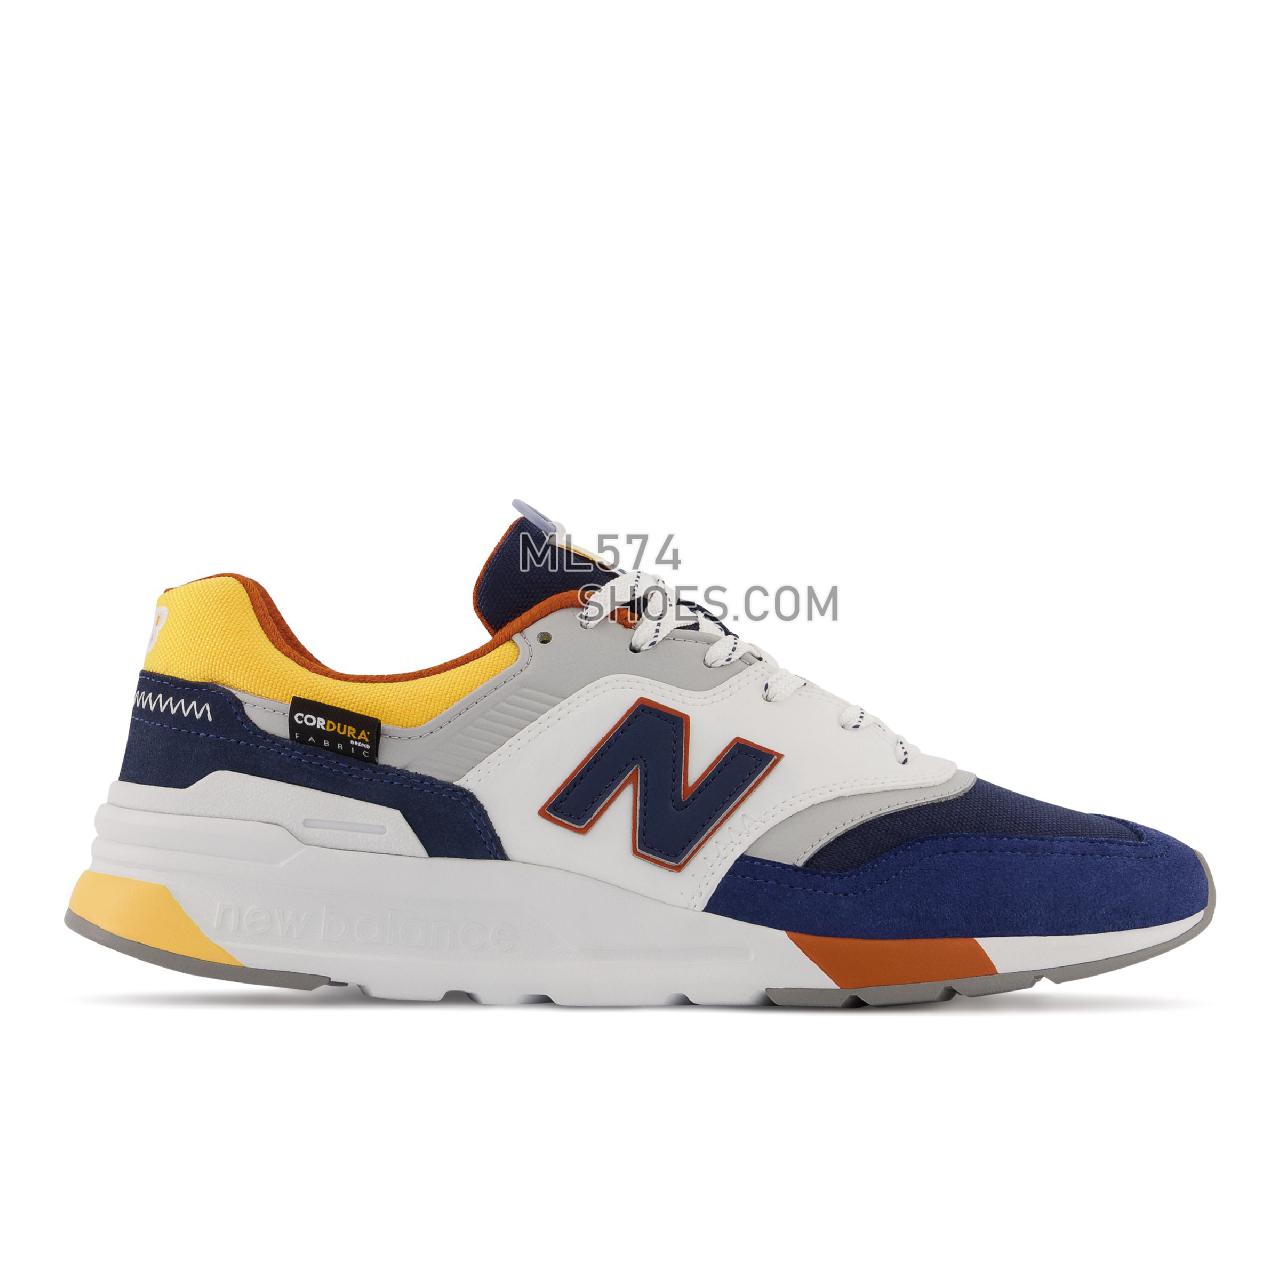 New Balance 997H - Men's Sport Style Sneakers - Moon Shadow with Vibrant Apricot - CM997HTE